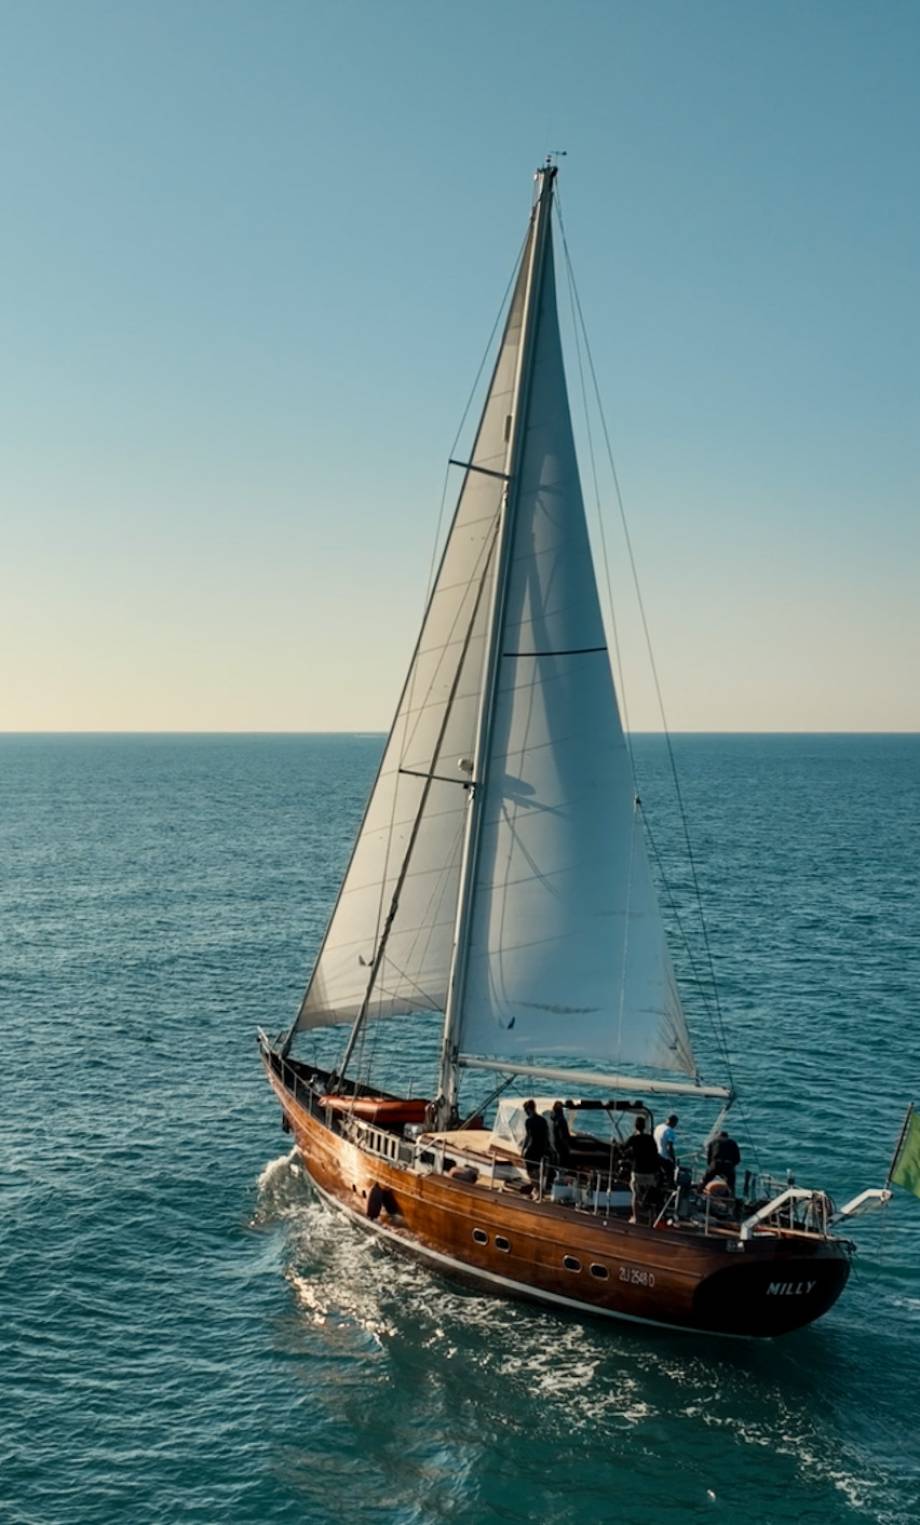 Milly classic vintage wood yacht motorsailer (10)